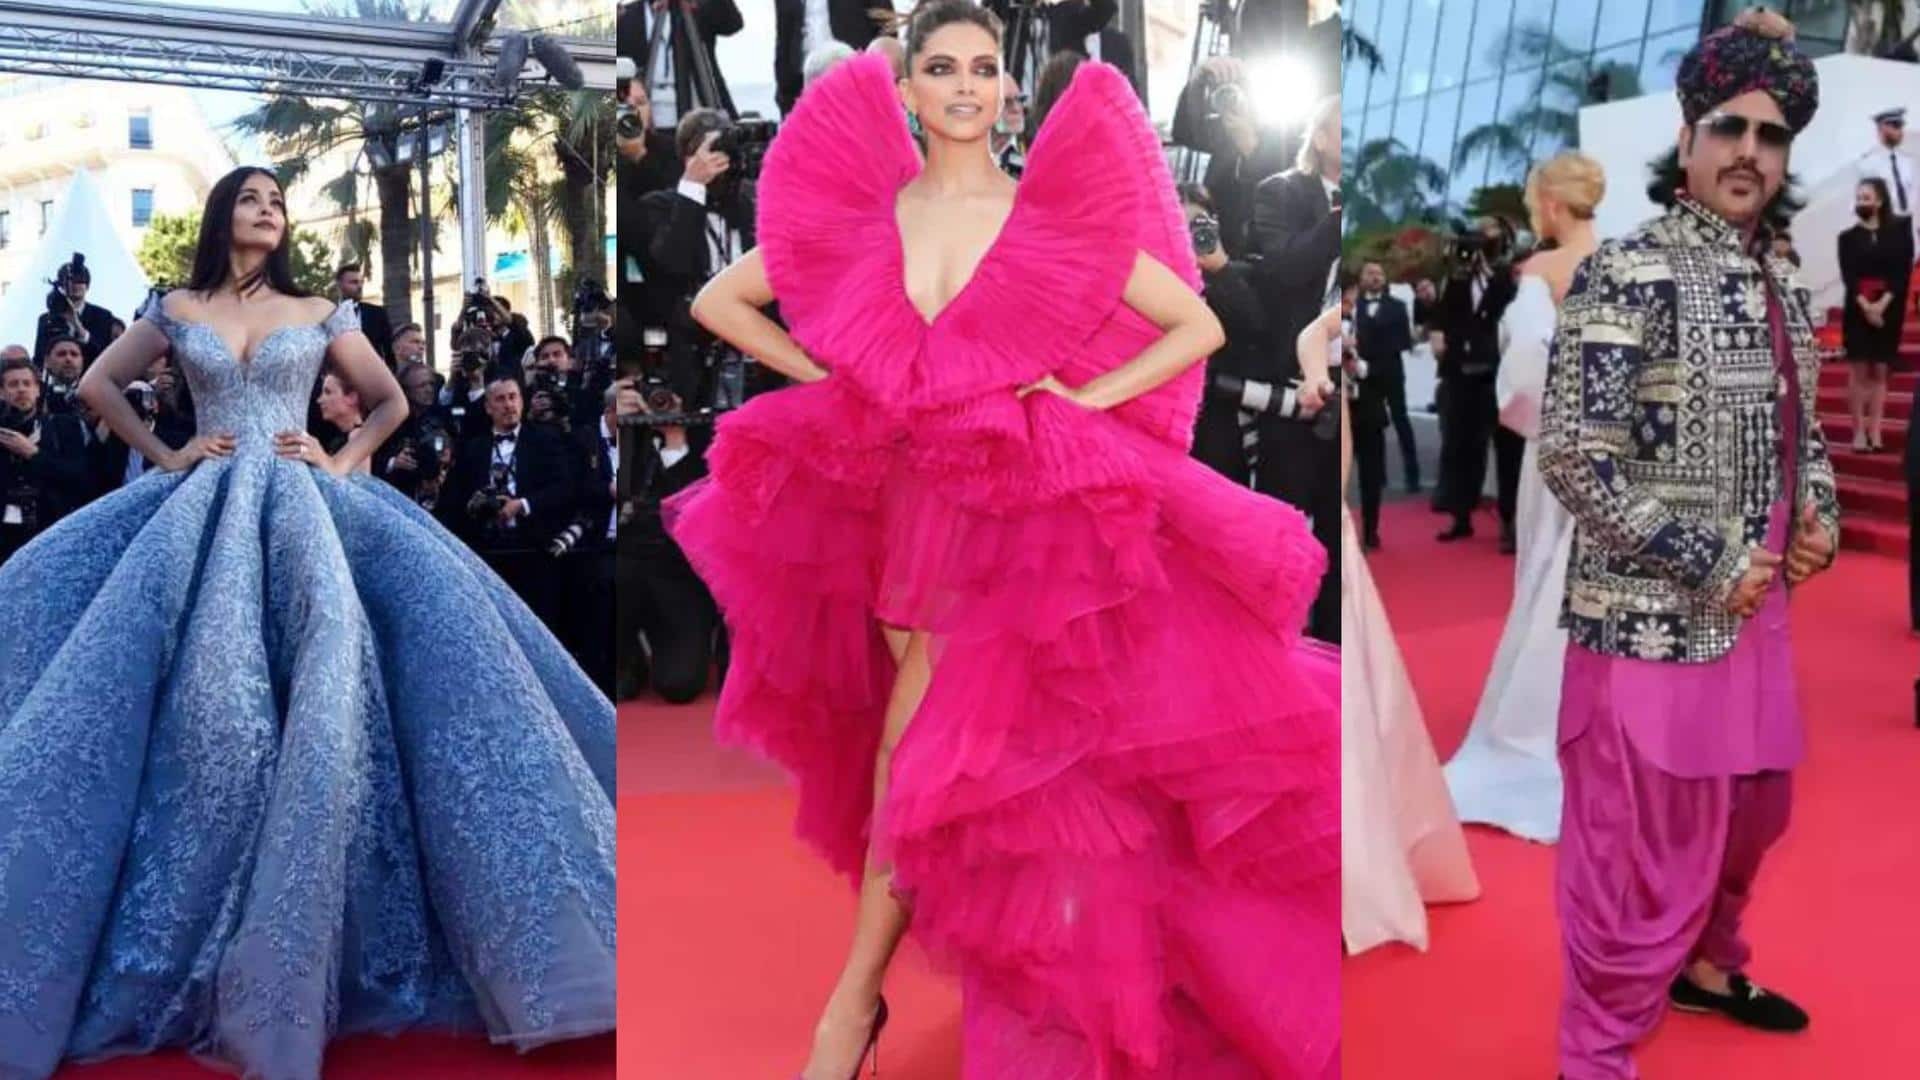 Blast from the past: Iconic Indian fashion moments at Cannes